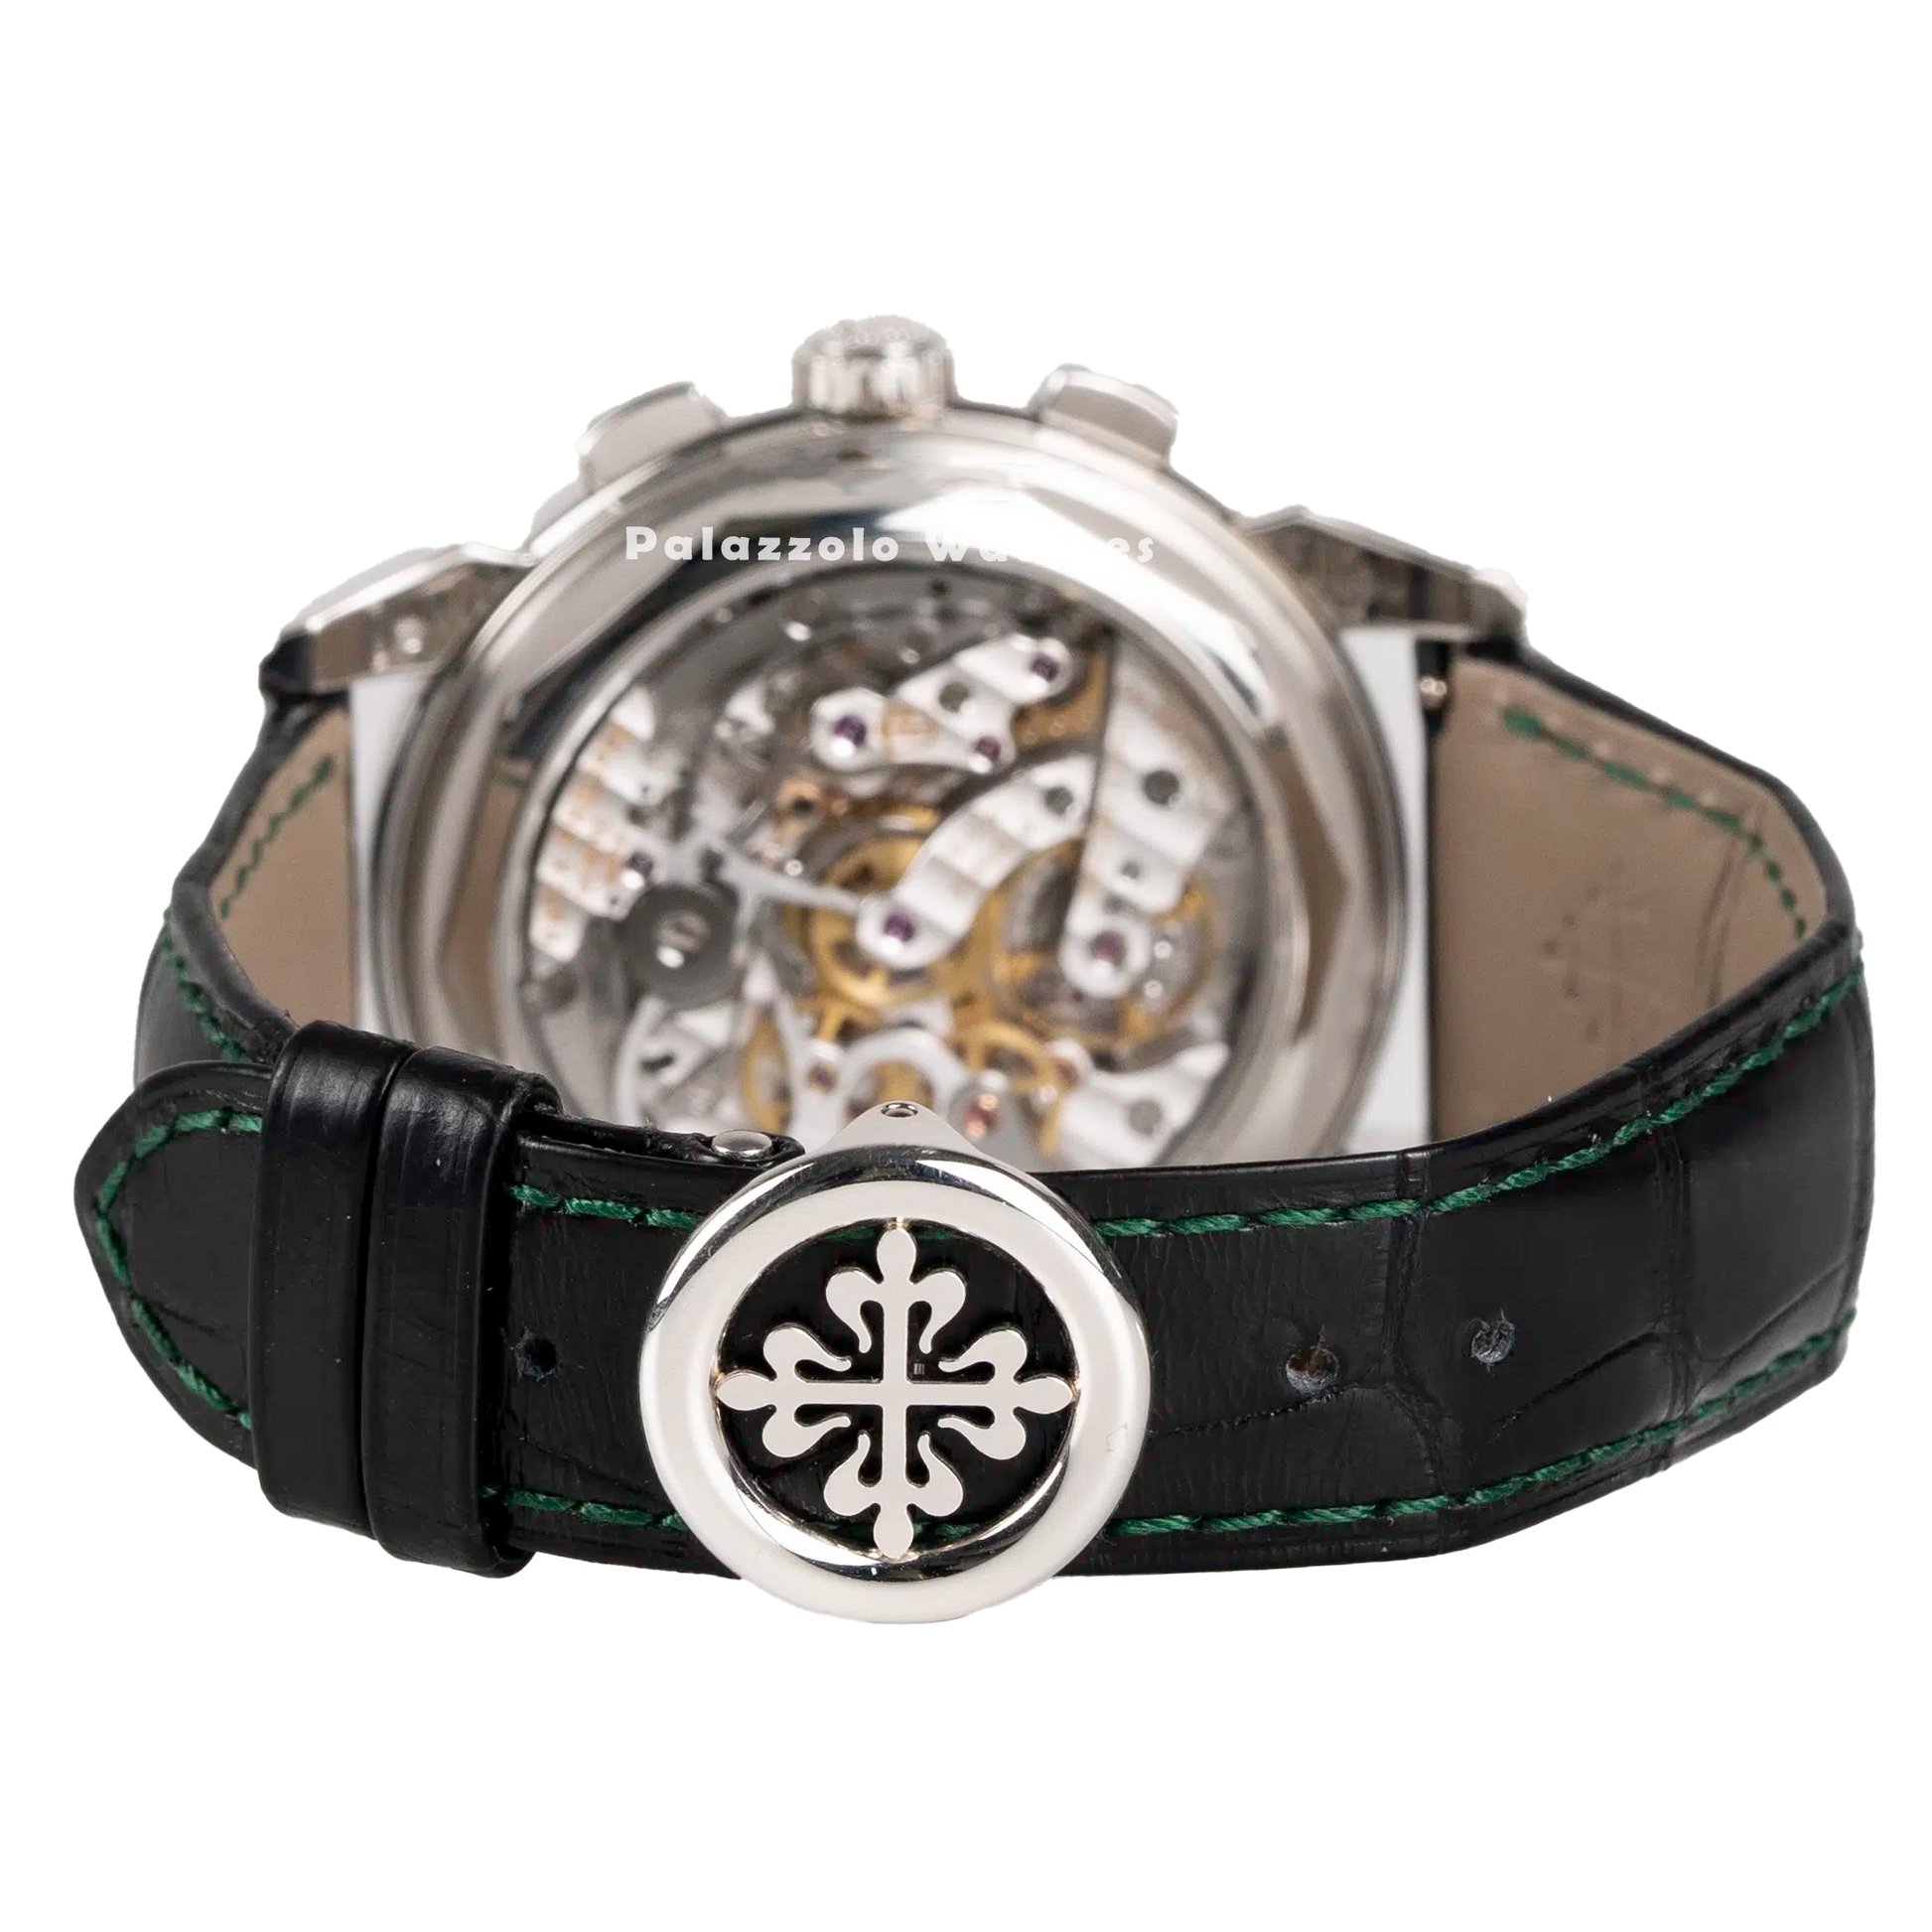 Patek Philippe Grand Complications 5270P Platinum with Green Dial - Palazzolo Watches